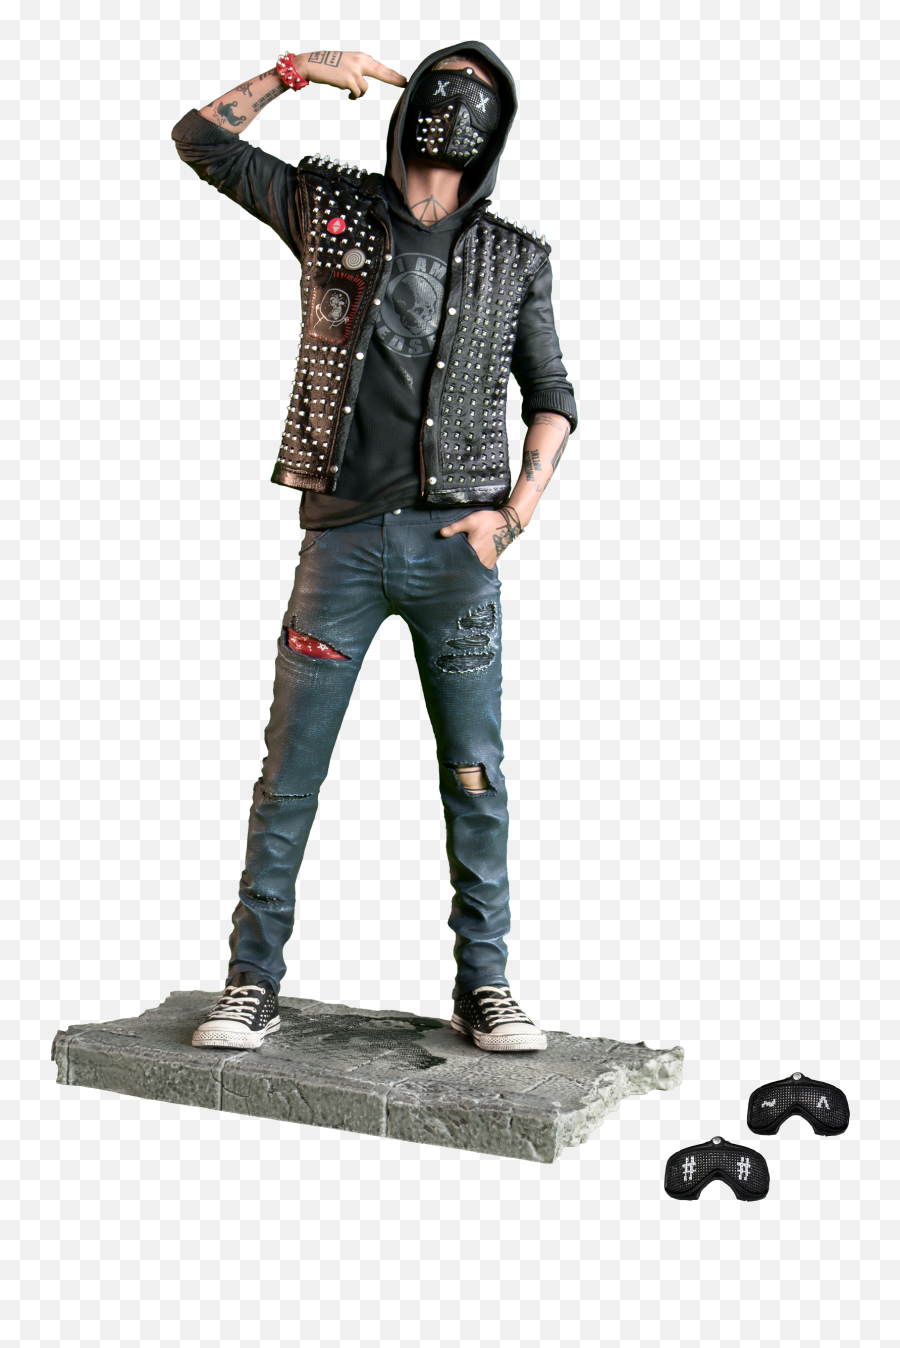 Wrench Watch Dogs 2 Png - Watch Dogs 2 Wrench Outfit,Watch Dogs 2 Png